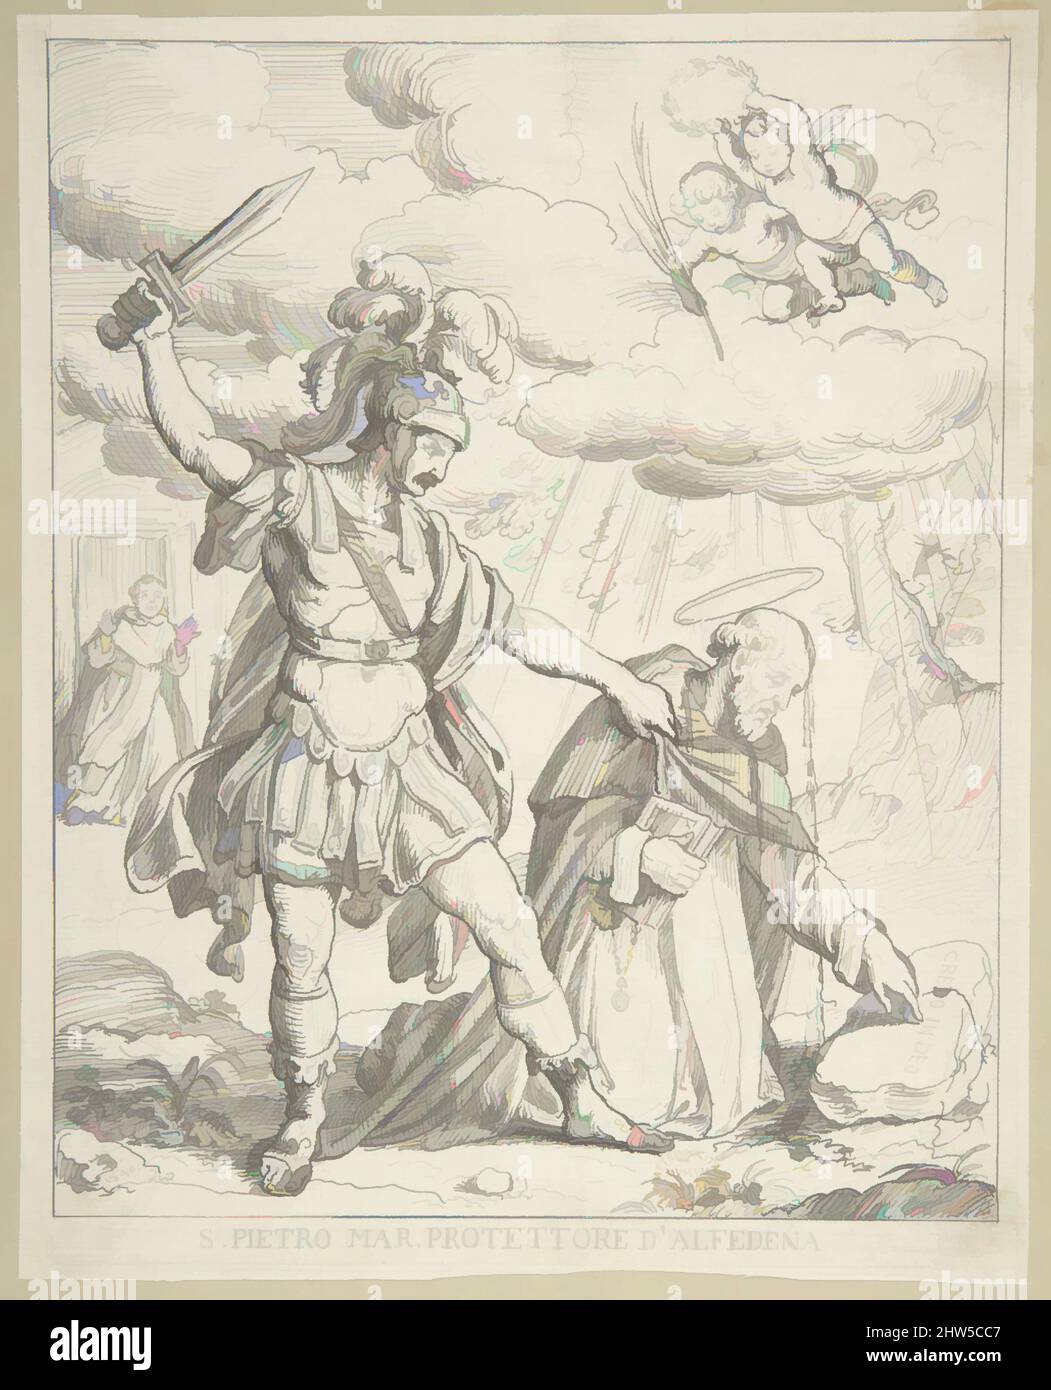 Art inspired by Martyrdom of St. Peter Martyr, 1840, Pen and ink, 9-1/8 x 7 in. (23.2 x 17.8 cm), Drawings, Anonymous, Italian, 19th century, Classic works modernized by Artotop with a splash of modernity. Shapes, color and value, eye-catching visual impact on art. Emotions through freedom of artworks in a contemporary way. A timeless message pursuing a wildly creative new direction. Artists turning to the digital medium and creating the Artotop NFT Stock Photo